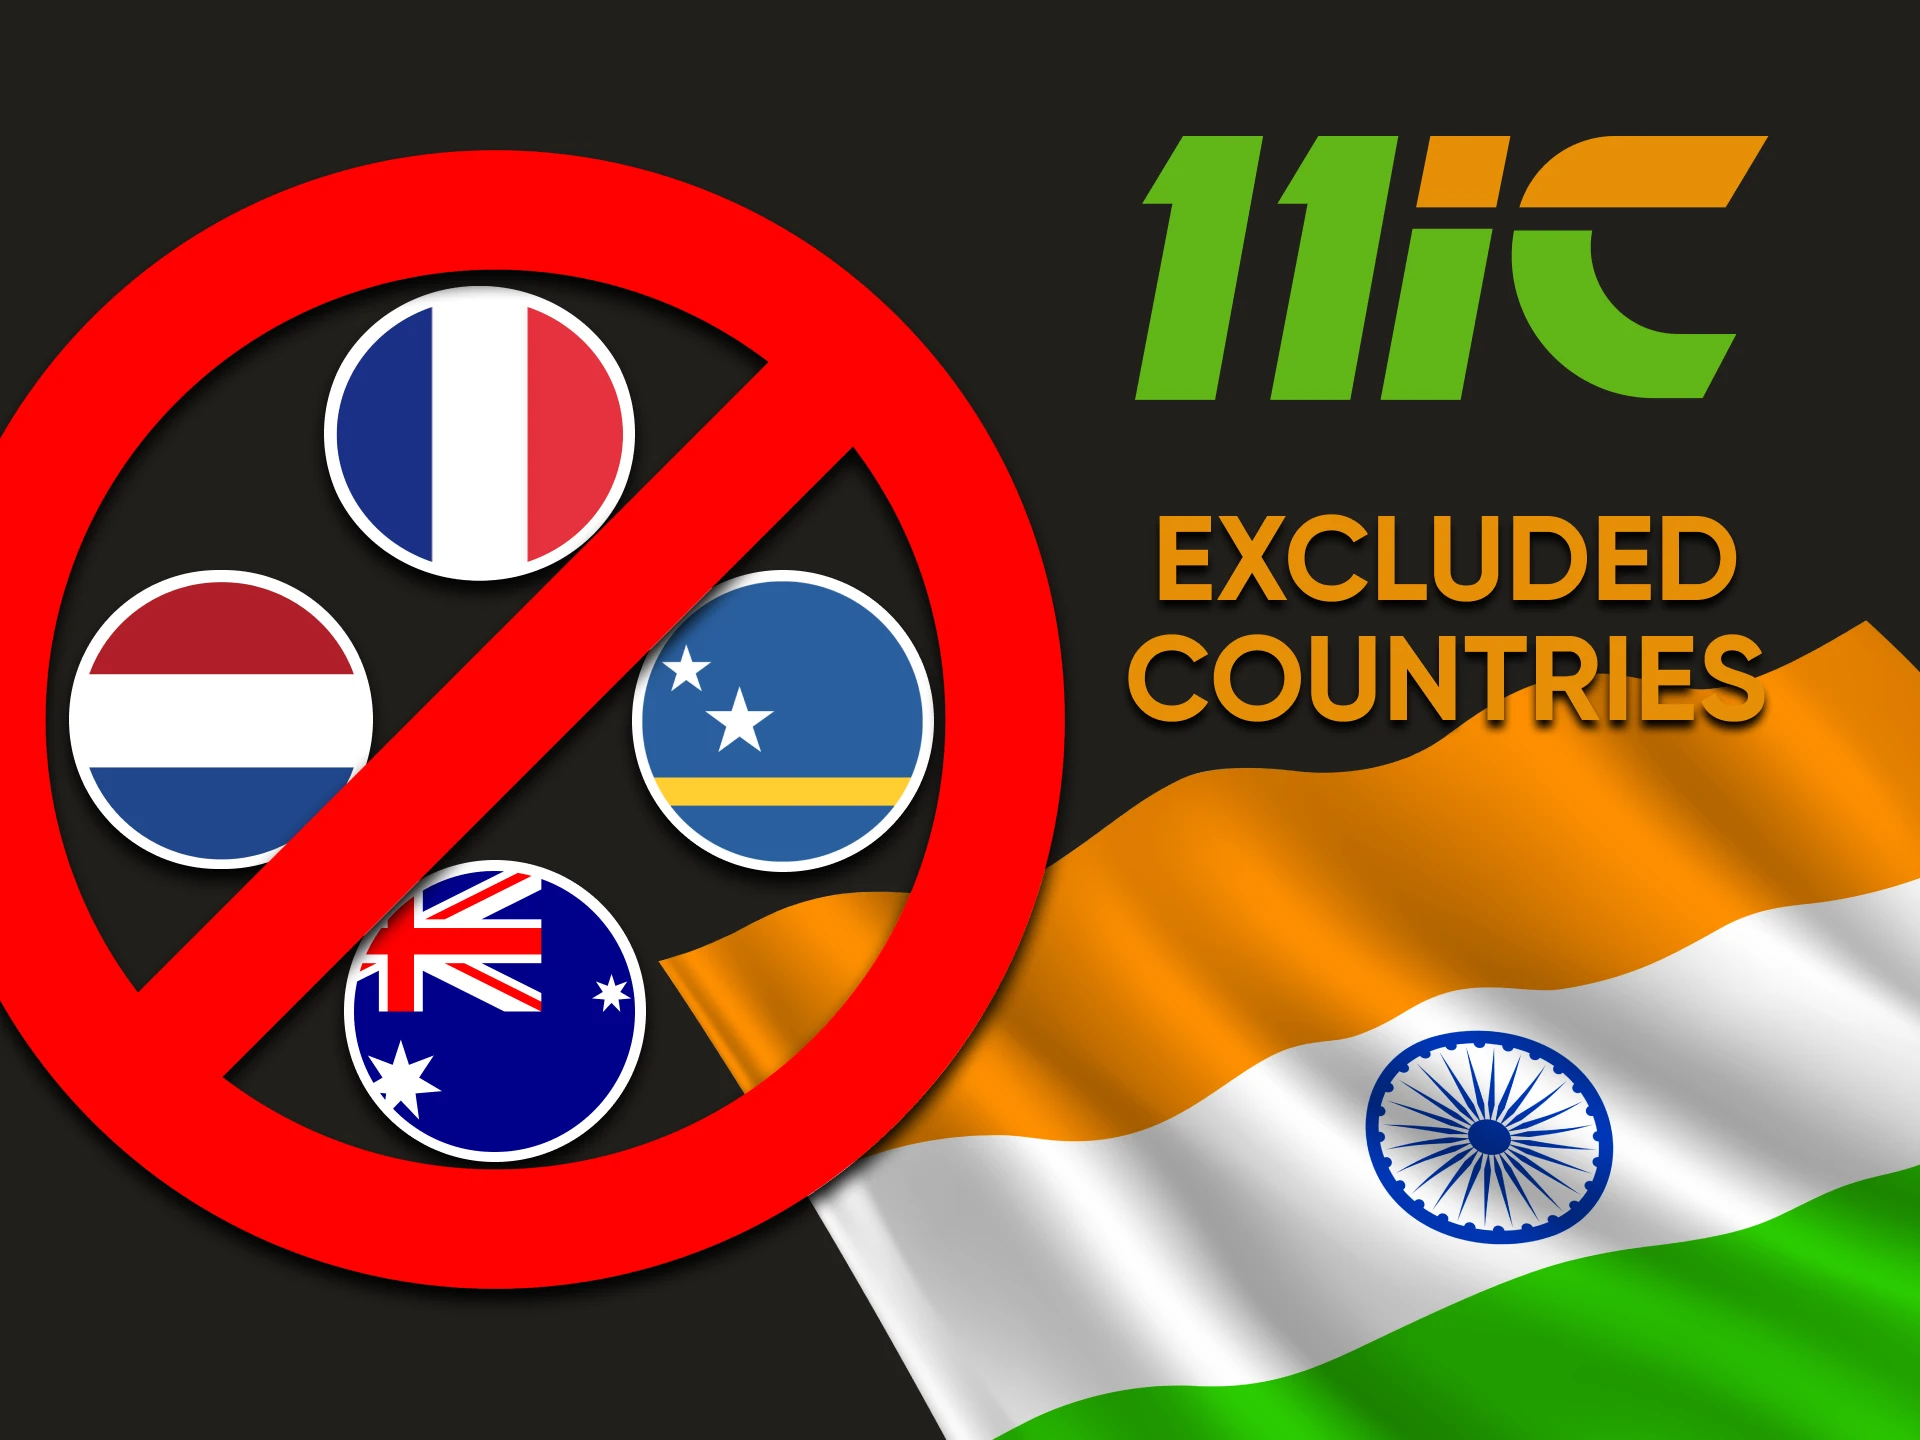 Research countries where 11ic is banned.